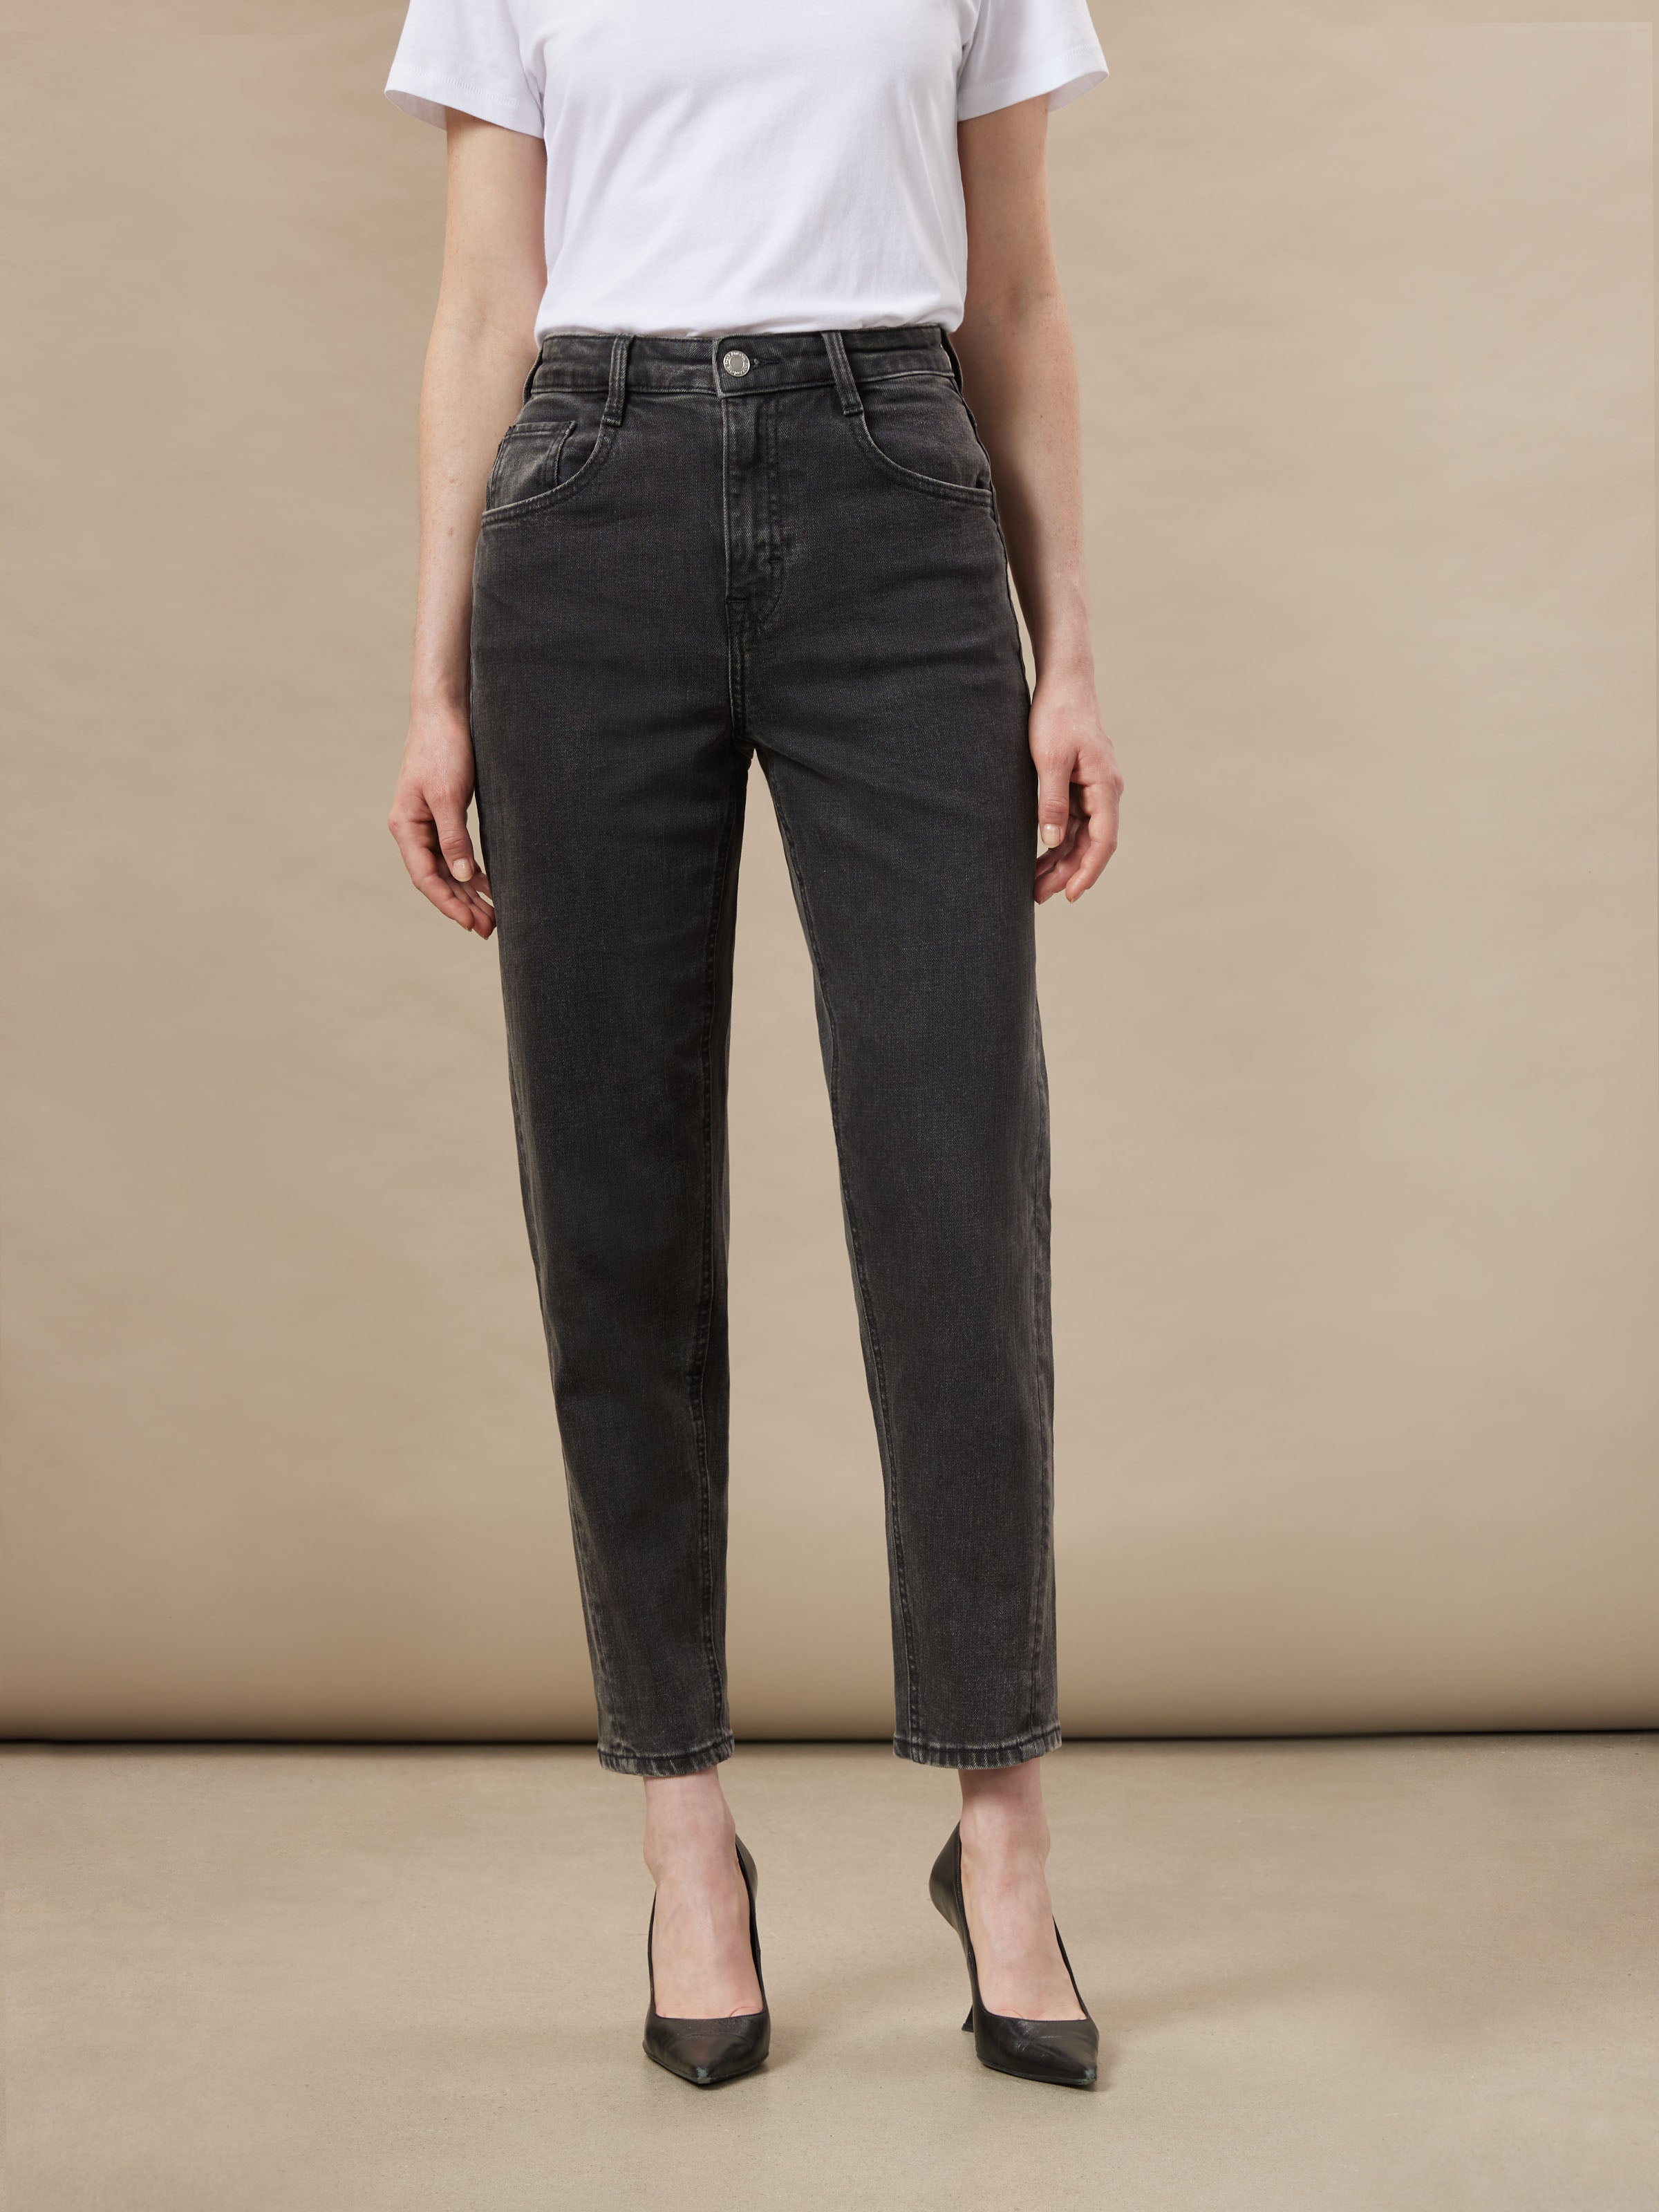 Skinny Jeans for Girls: Shop for Essential Denim for the Family